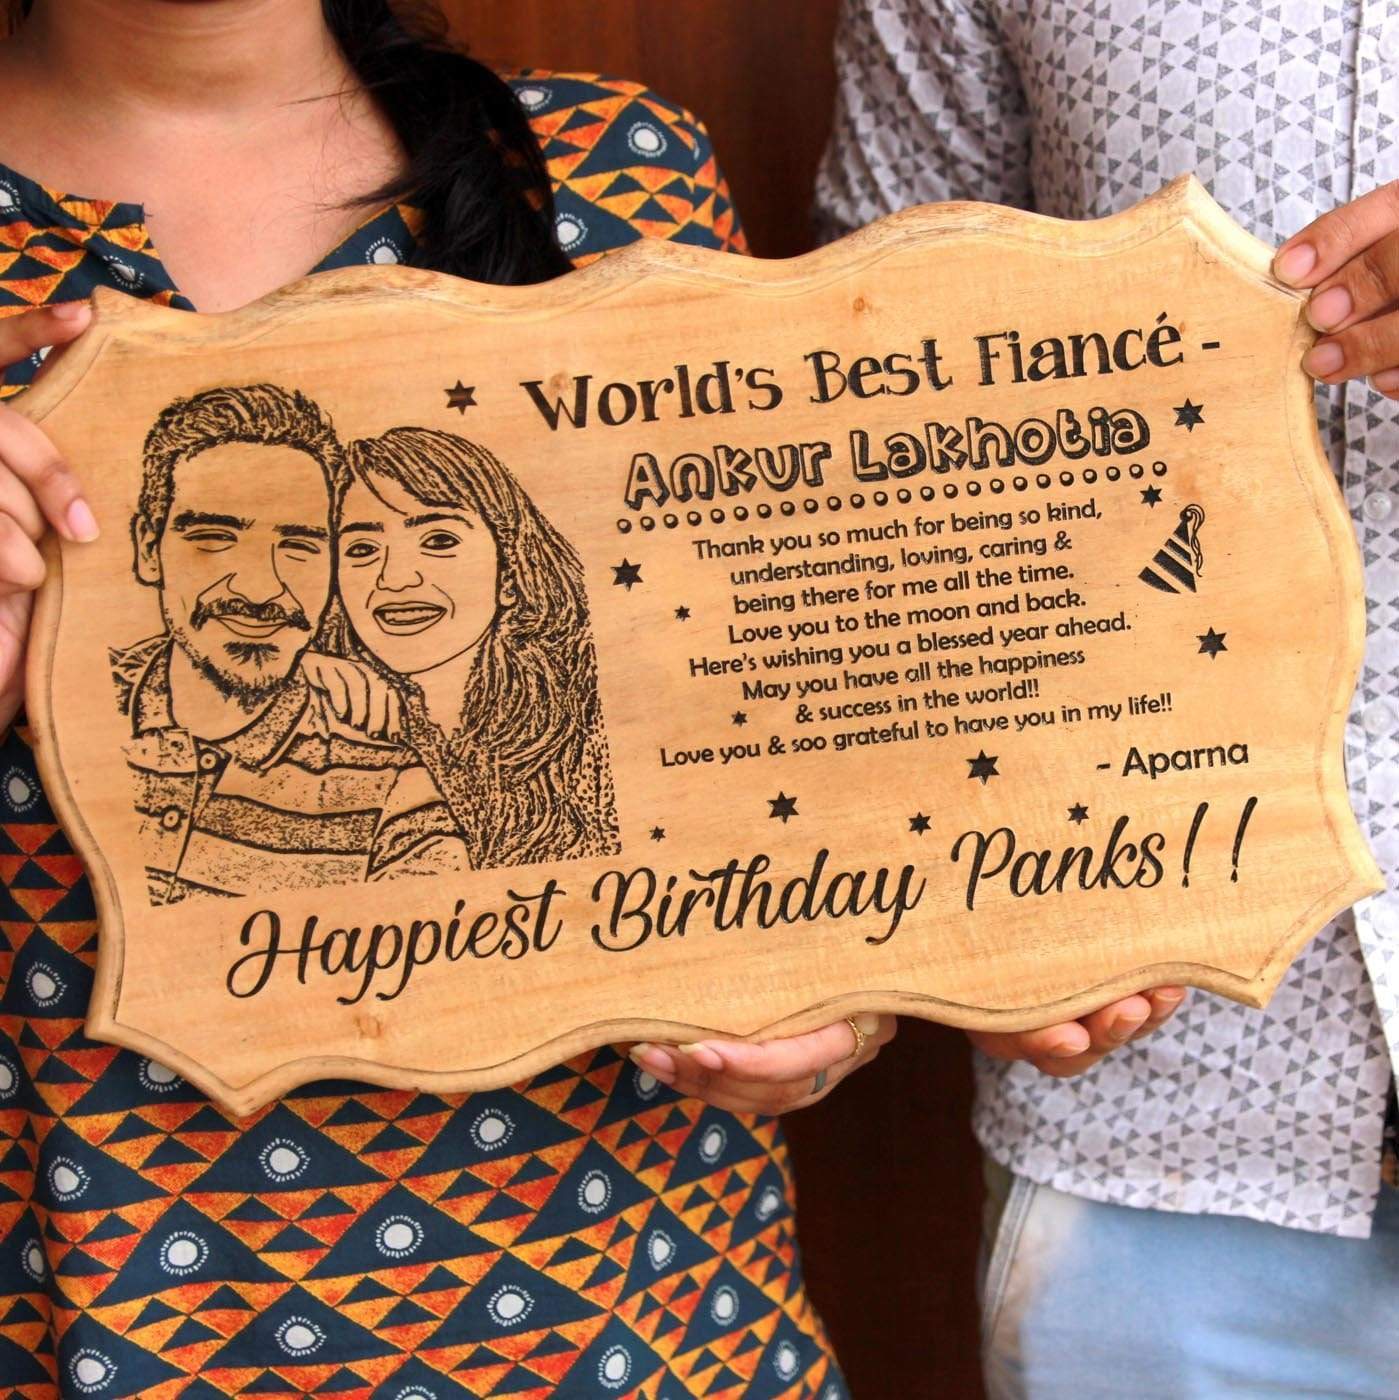 World's Best Fiancé Award Certificate. Engrave Photo On Wood With This Wooden Certificate. These Funny Certificates Are Great Gifts For Fiancé. Looking for unique birthday gifts for fiancé? This certificate of recognition is one of the best personalized gifts for him.